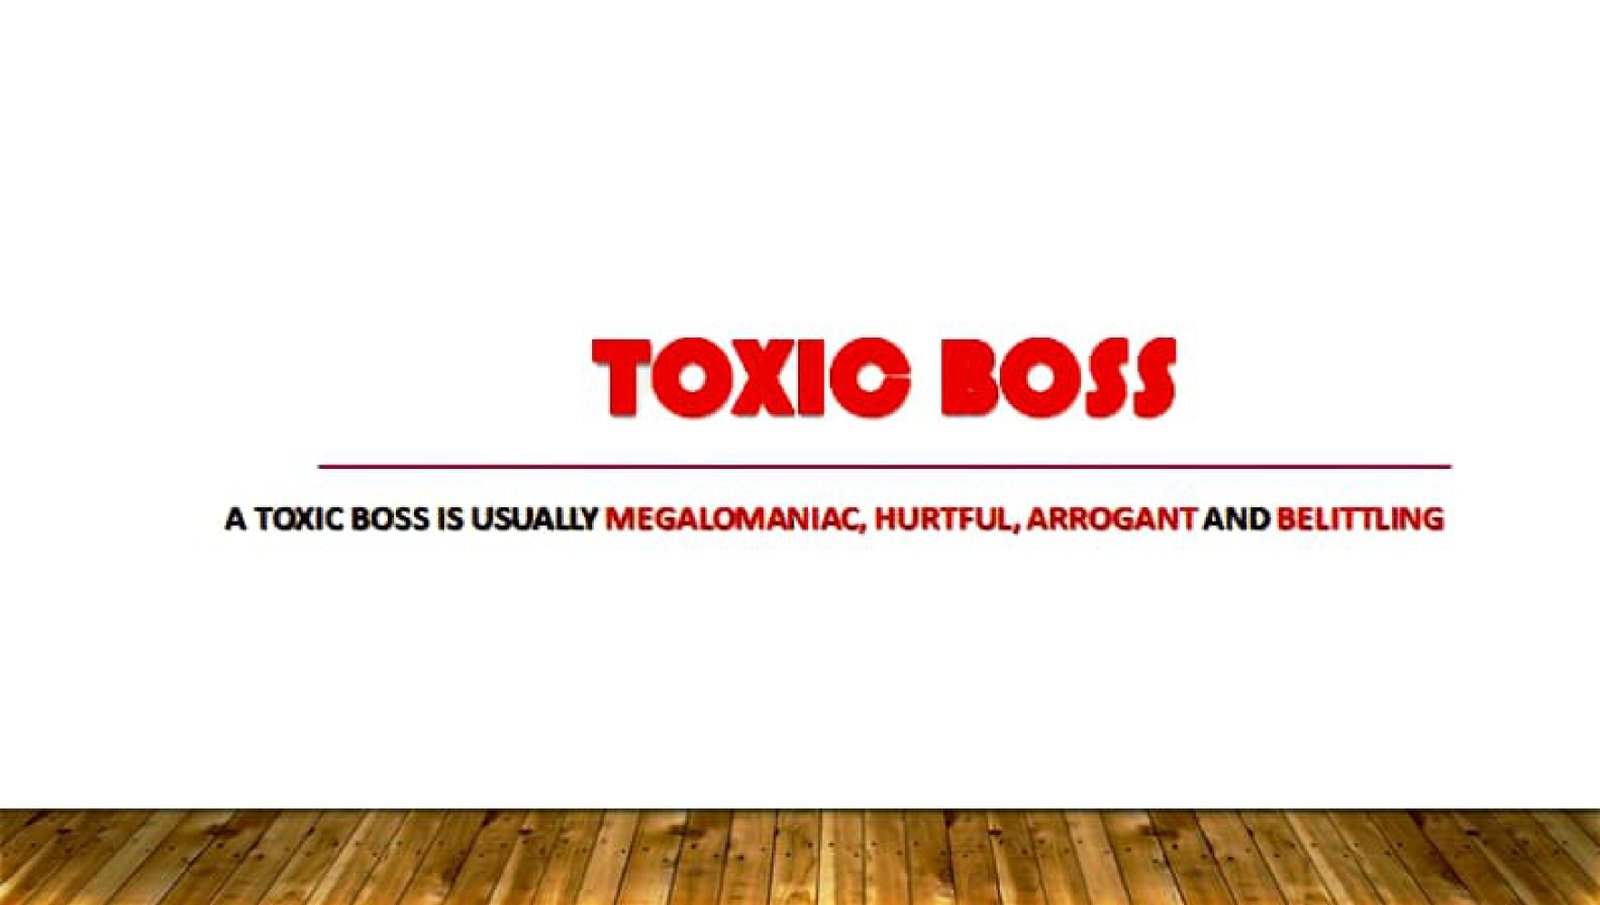 Why-Toxic-Boss-is-Megalomaniac-